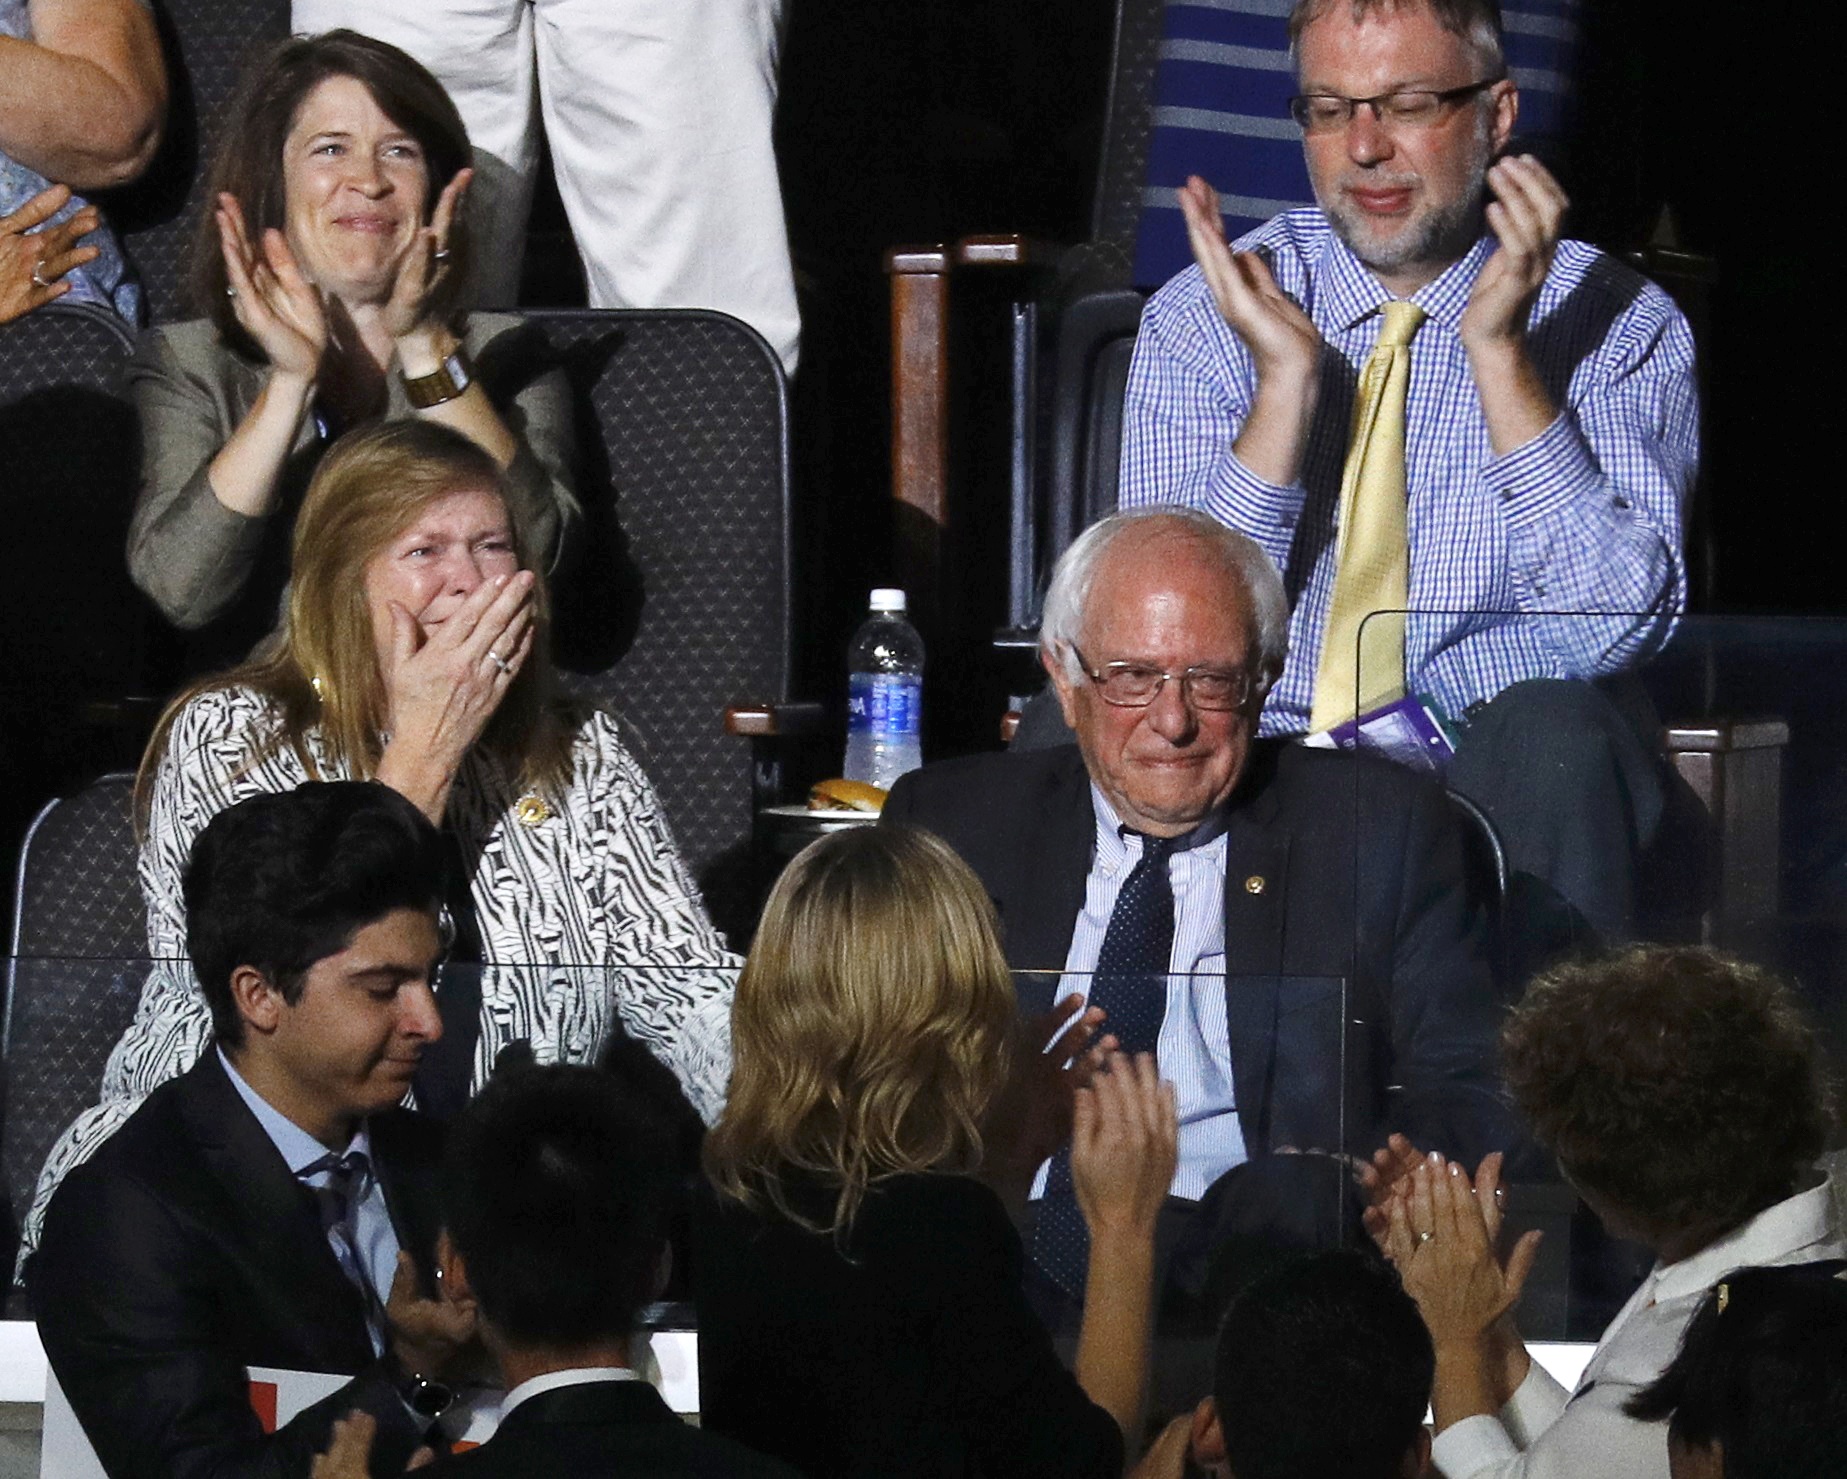 PHOTO: U.S. Senator Bernie Sanders and his wife Jane react to his brother Larry making the presidential nomination roll call for Democrats Abroad at the Democratic National Convention in Philadelphia, July 26, 2016.